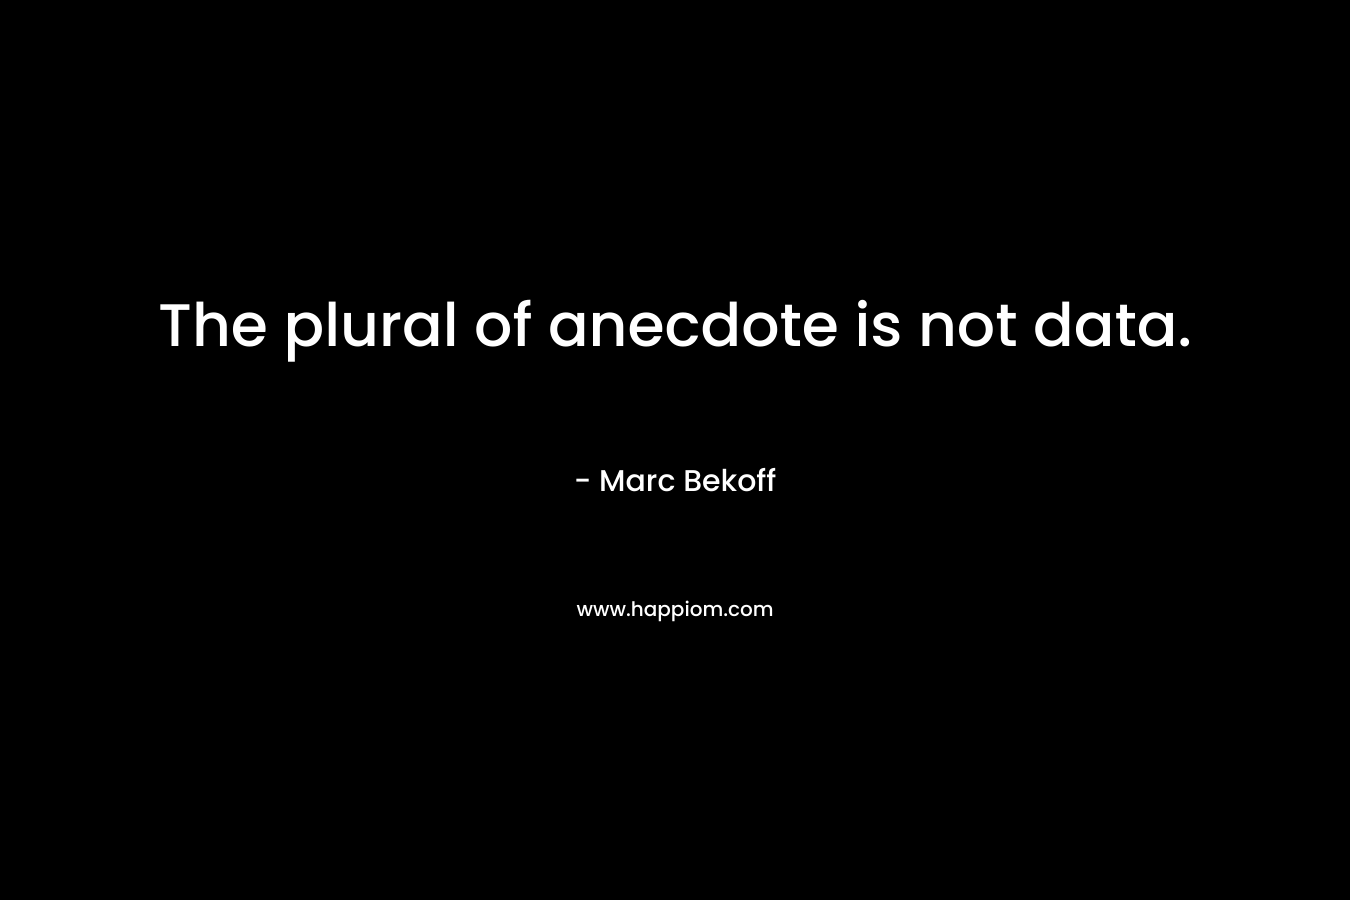 The plural of anecdote is not data.